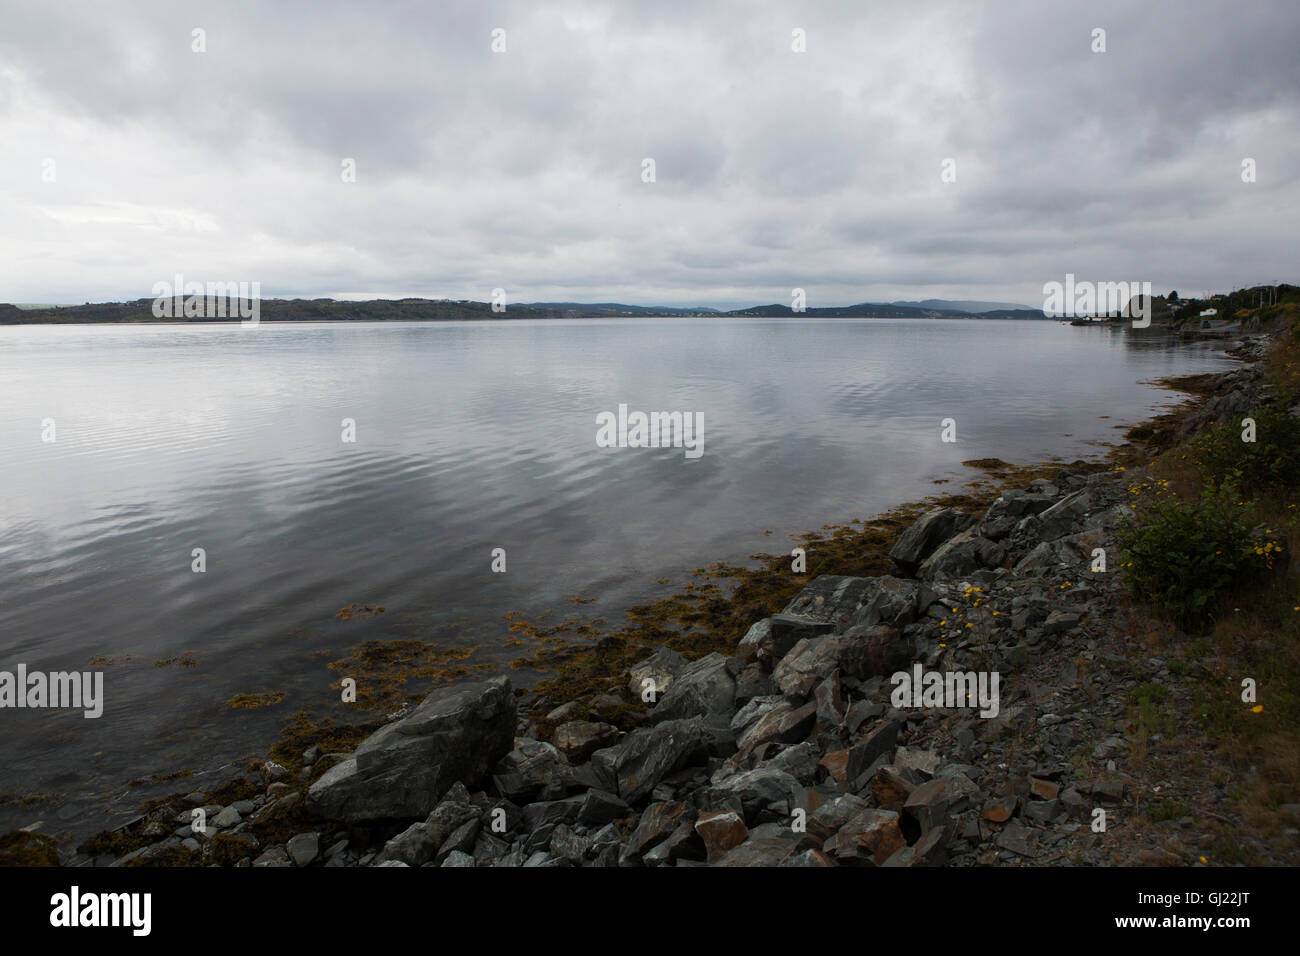 Bay Roberts in Newfoundland and Labrador, Canada. Heavy, overcast skies hang over the shoreline over Conception Bay. Stock Photo